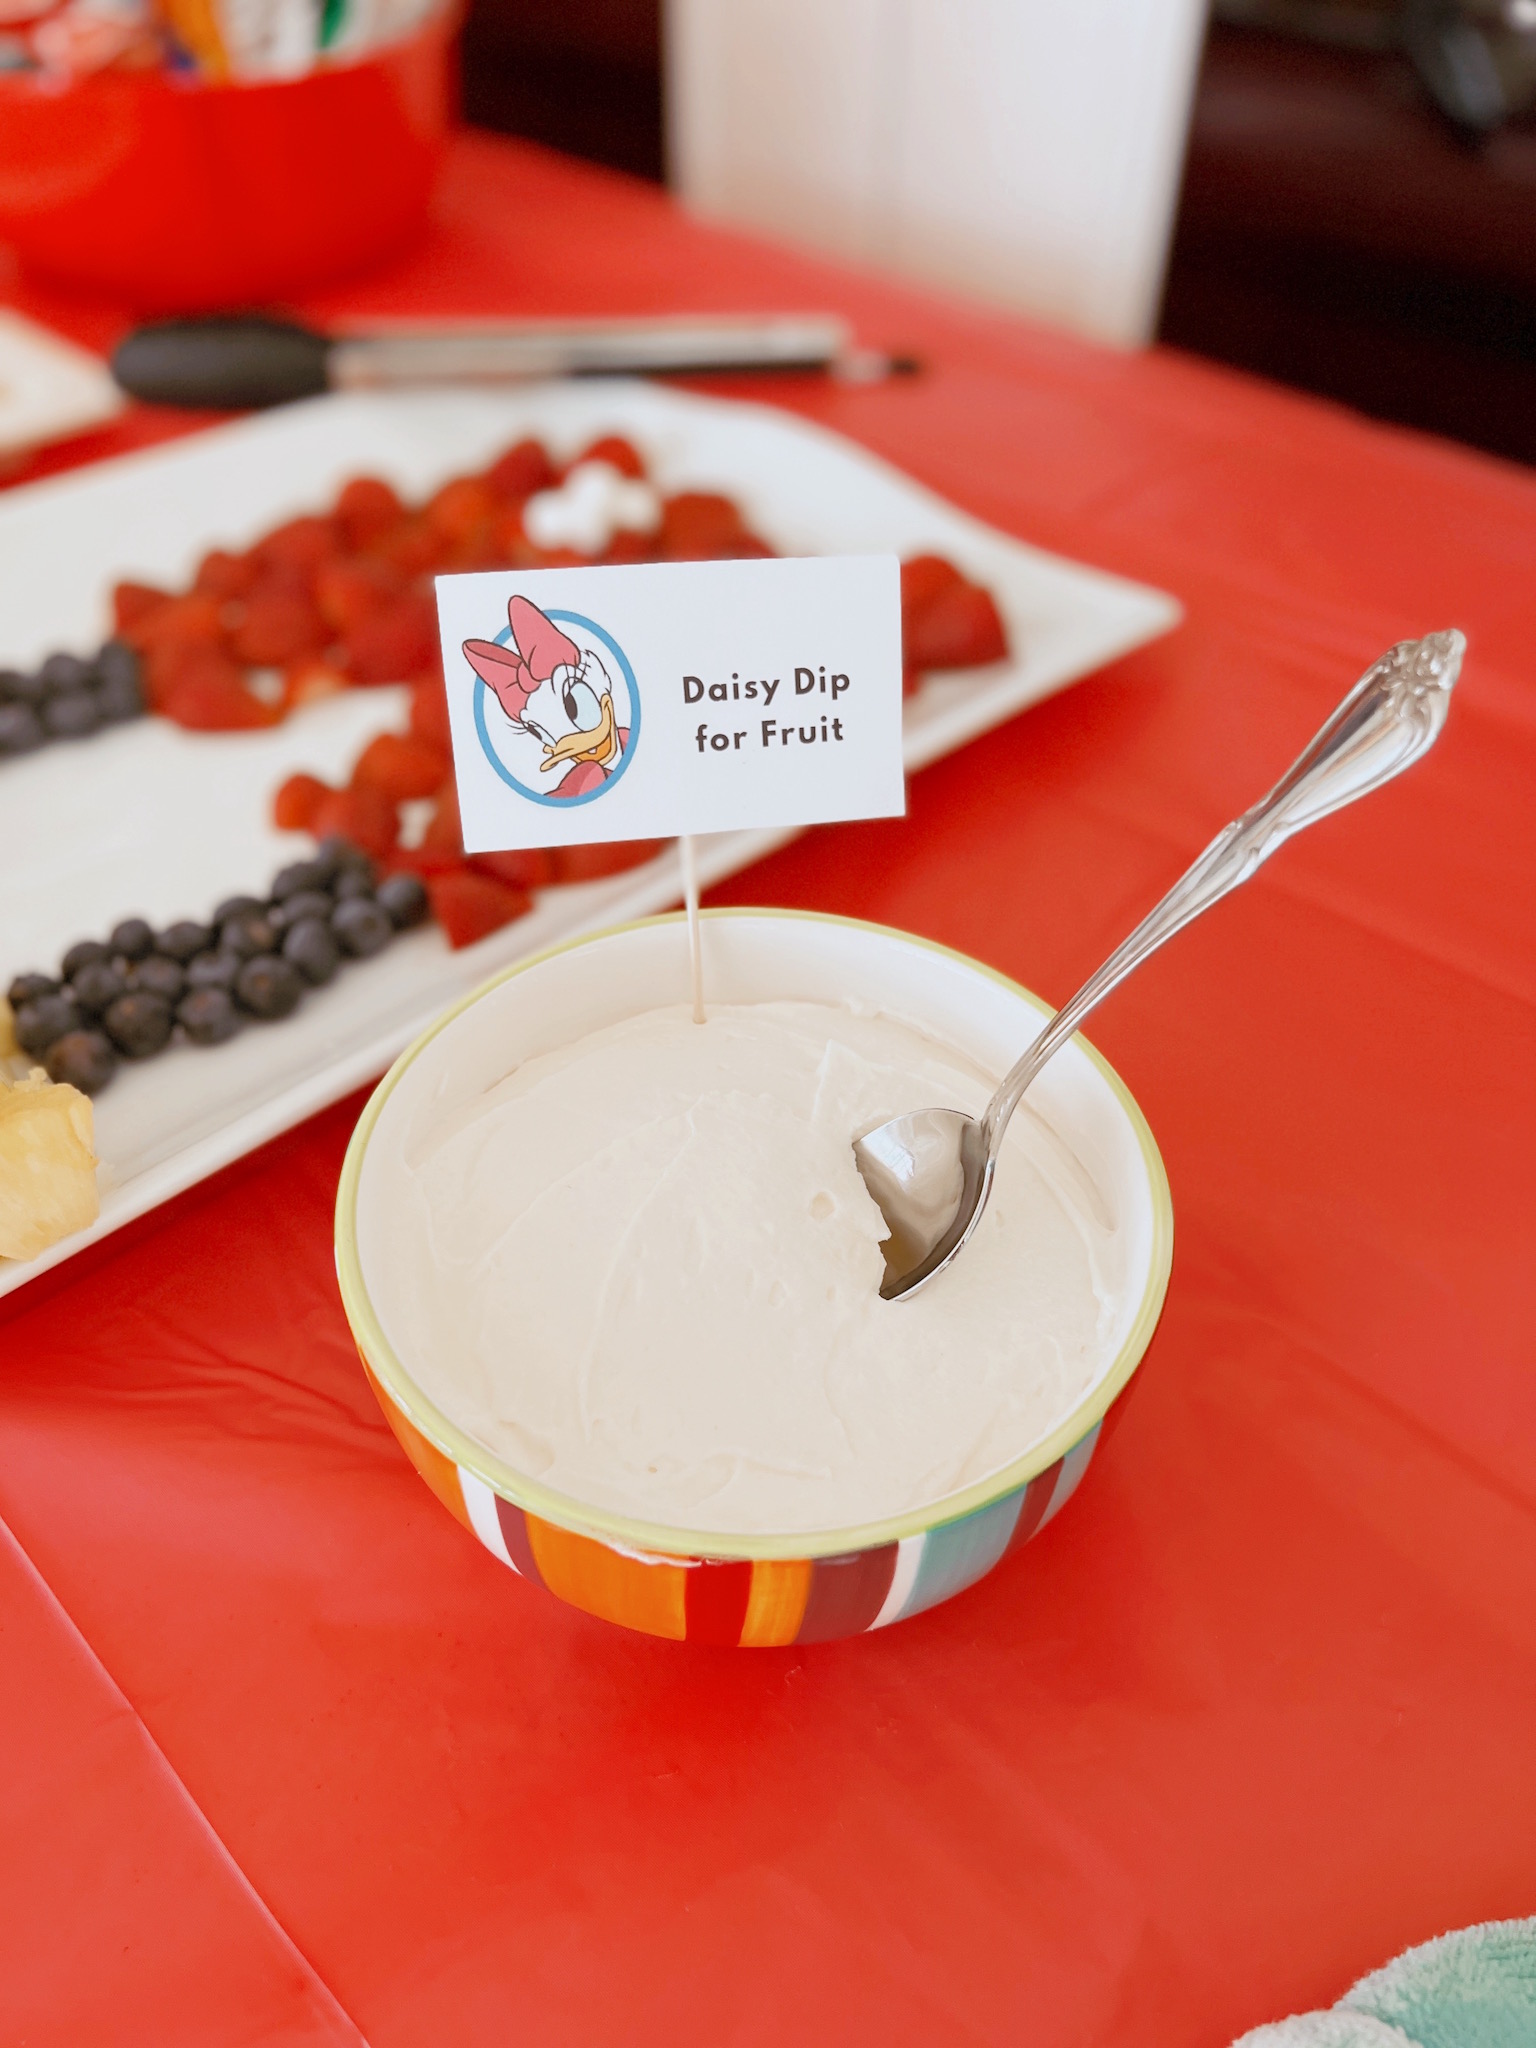 Mickey Mouse fruit platter and Daisy Dip at Pepper's Magical "Mickey & Minnie Mouse" 3rd Birthday Pool Party | Creative ideas for hosting a magical Mickey & Minnie themed birthday bash for your little Mouseketeer with do-able decor, punny snacks, and party games that are fun for all ages! via thinkingcloset.com